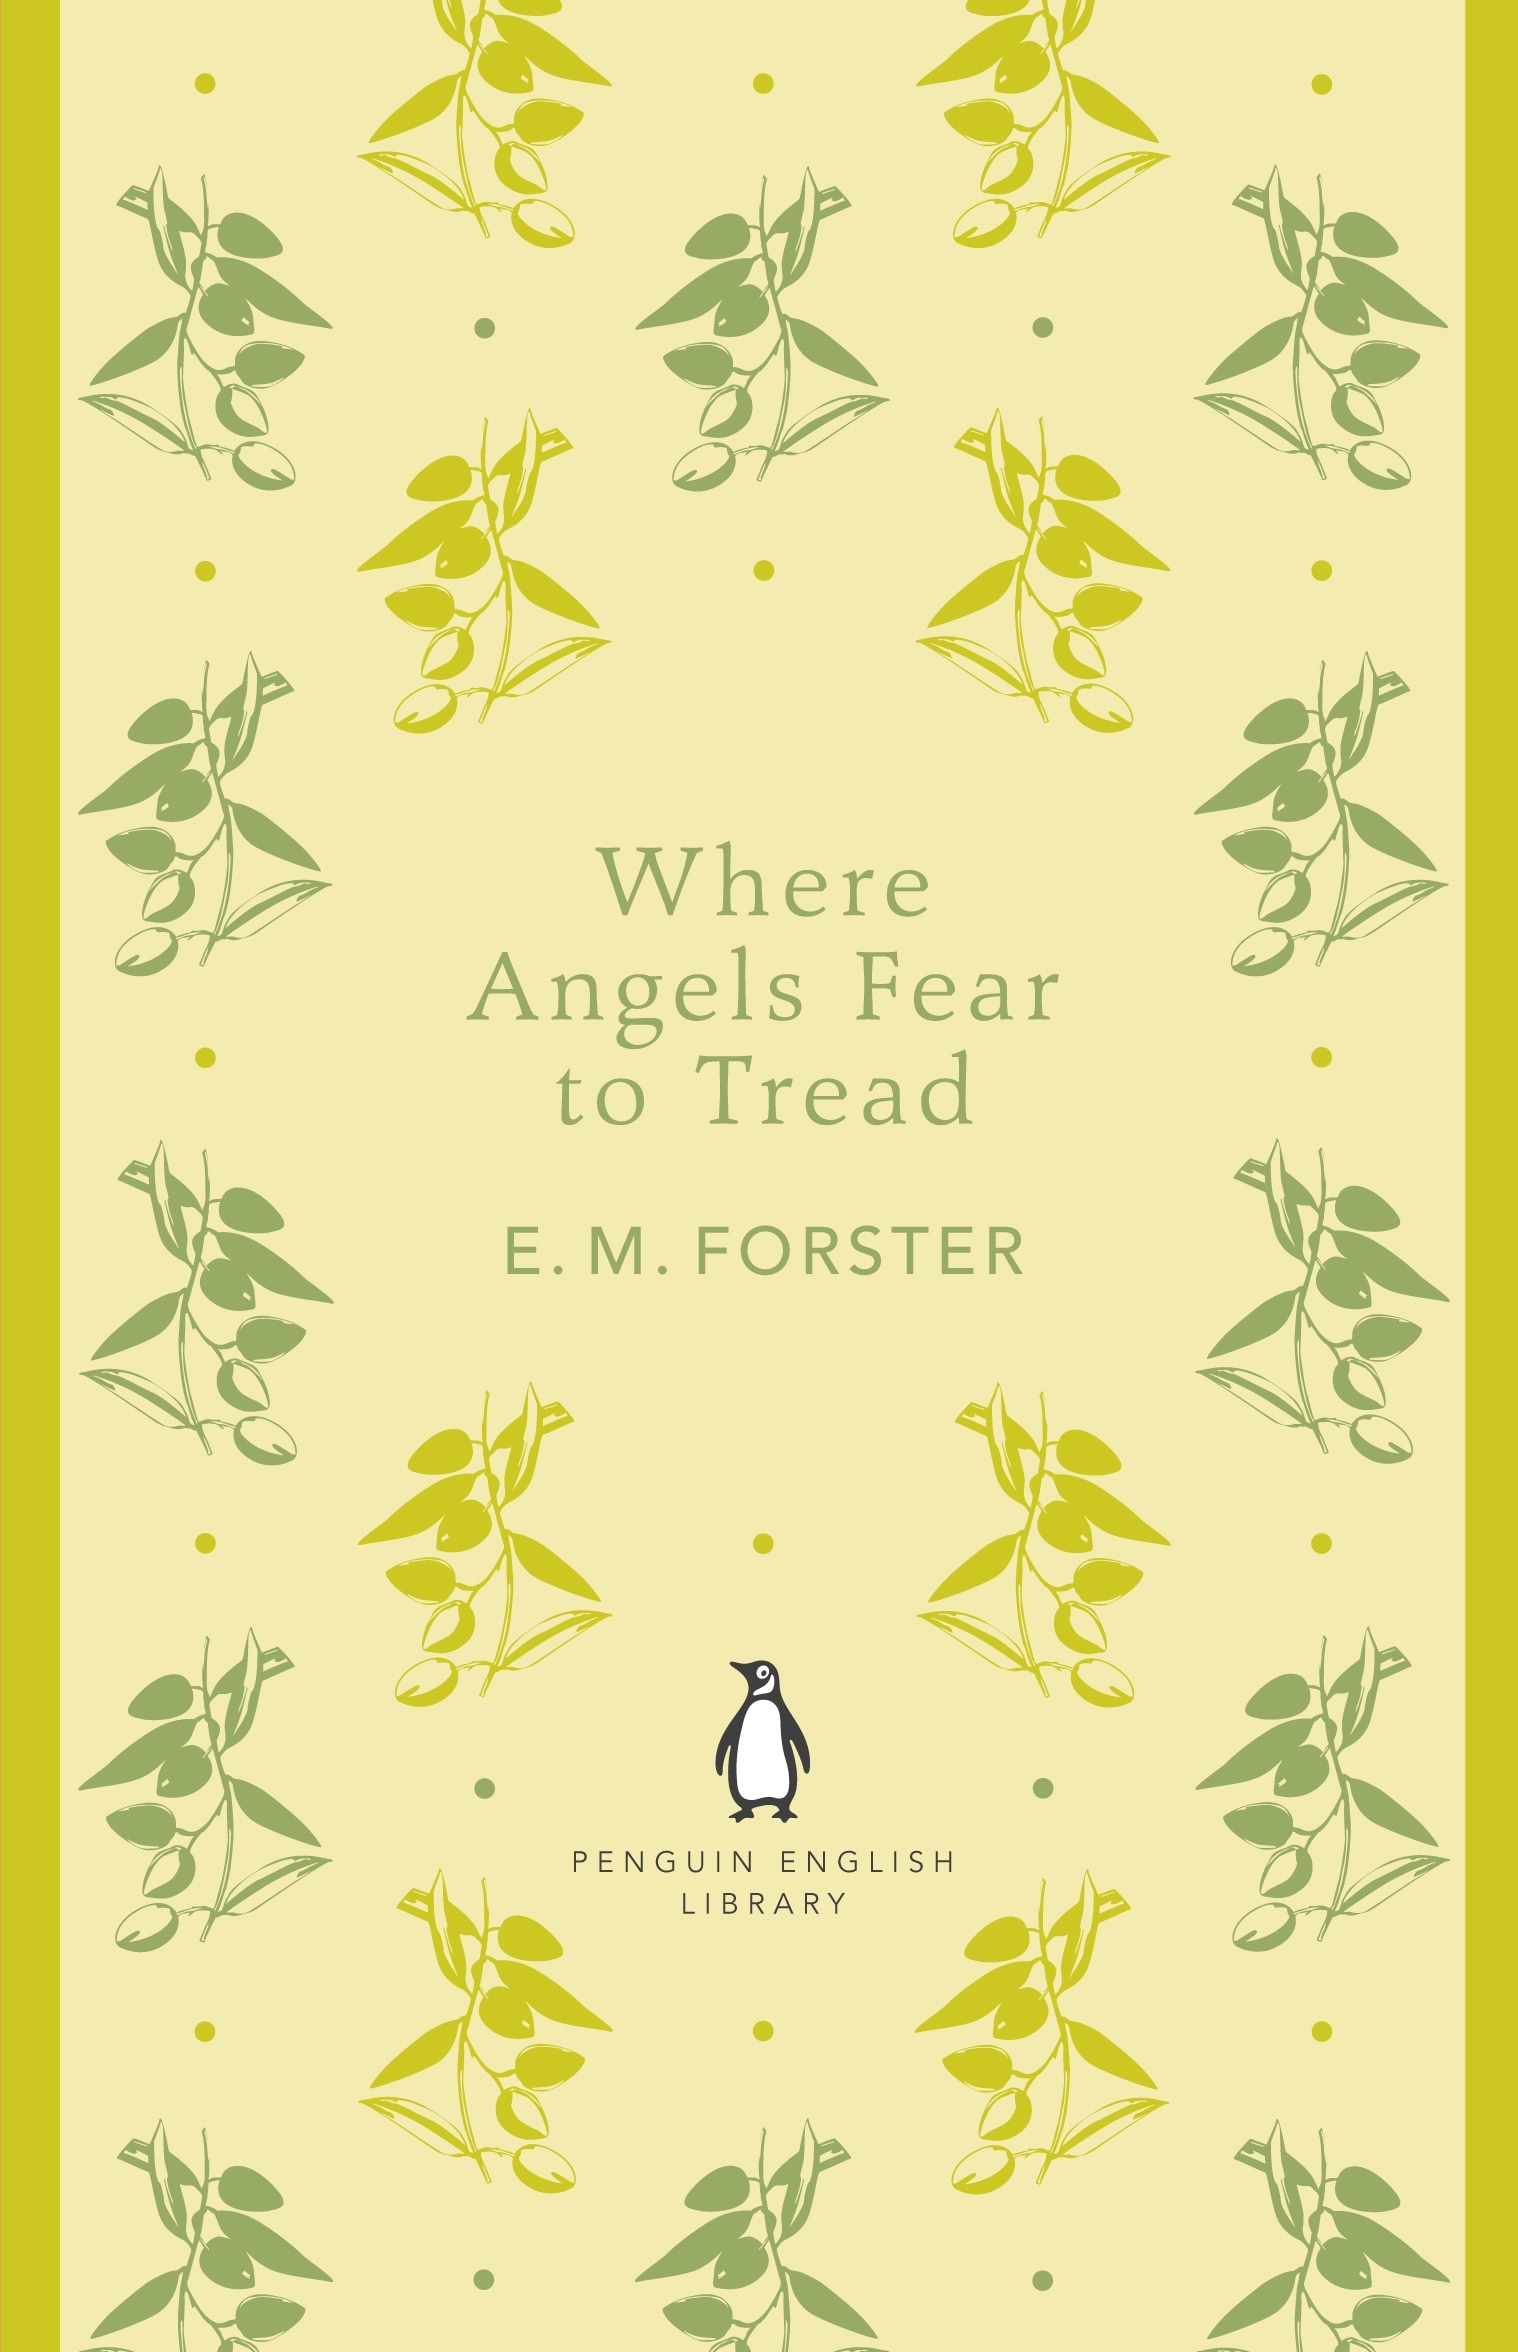 Book “Where Angels Fear to Tread” by E M Forster — May 31, 2012